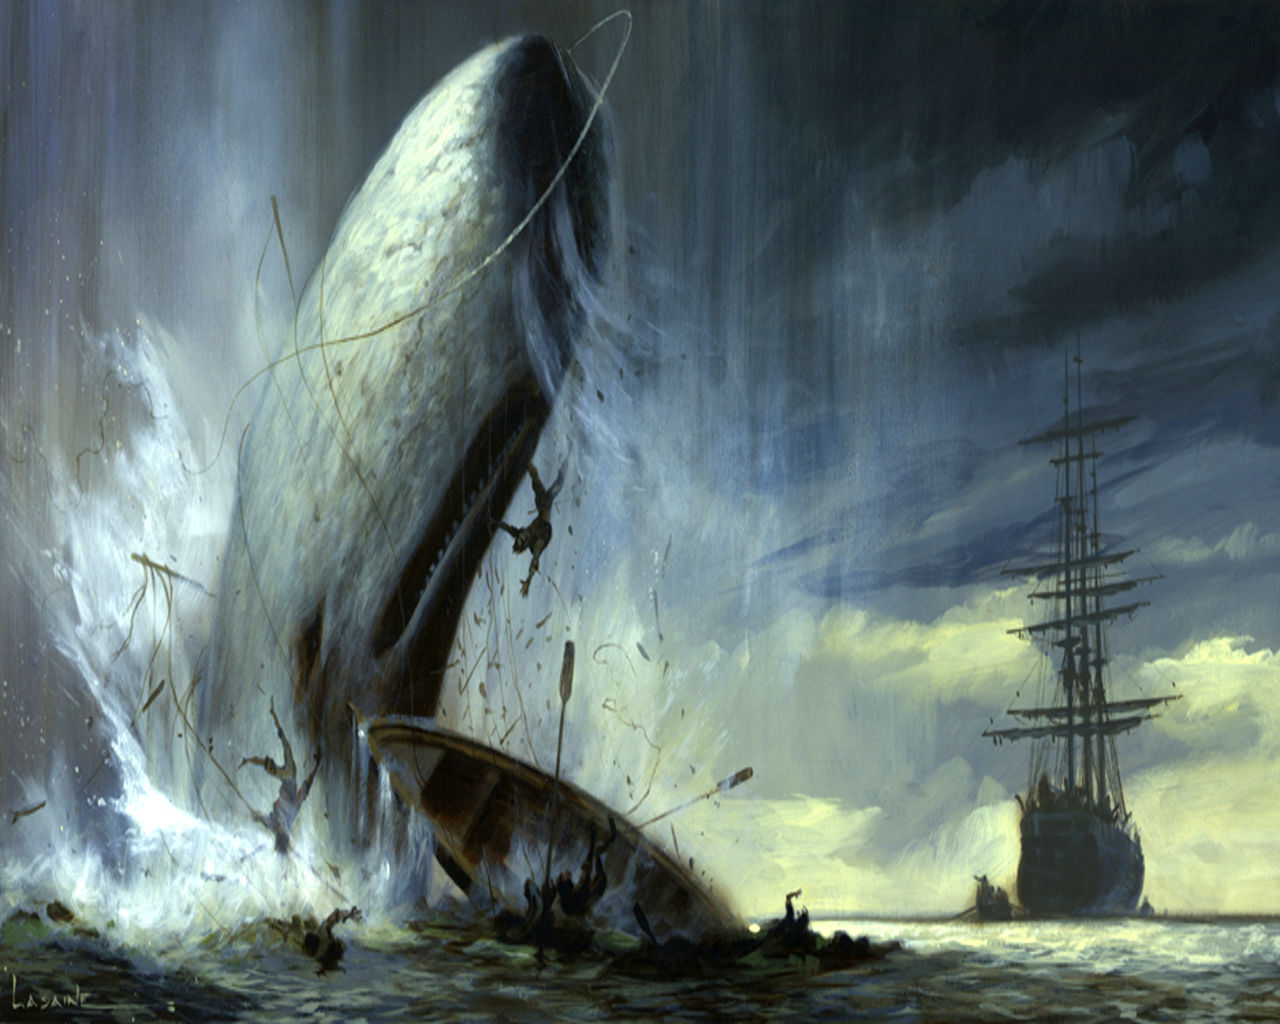 Moby dick the pequod